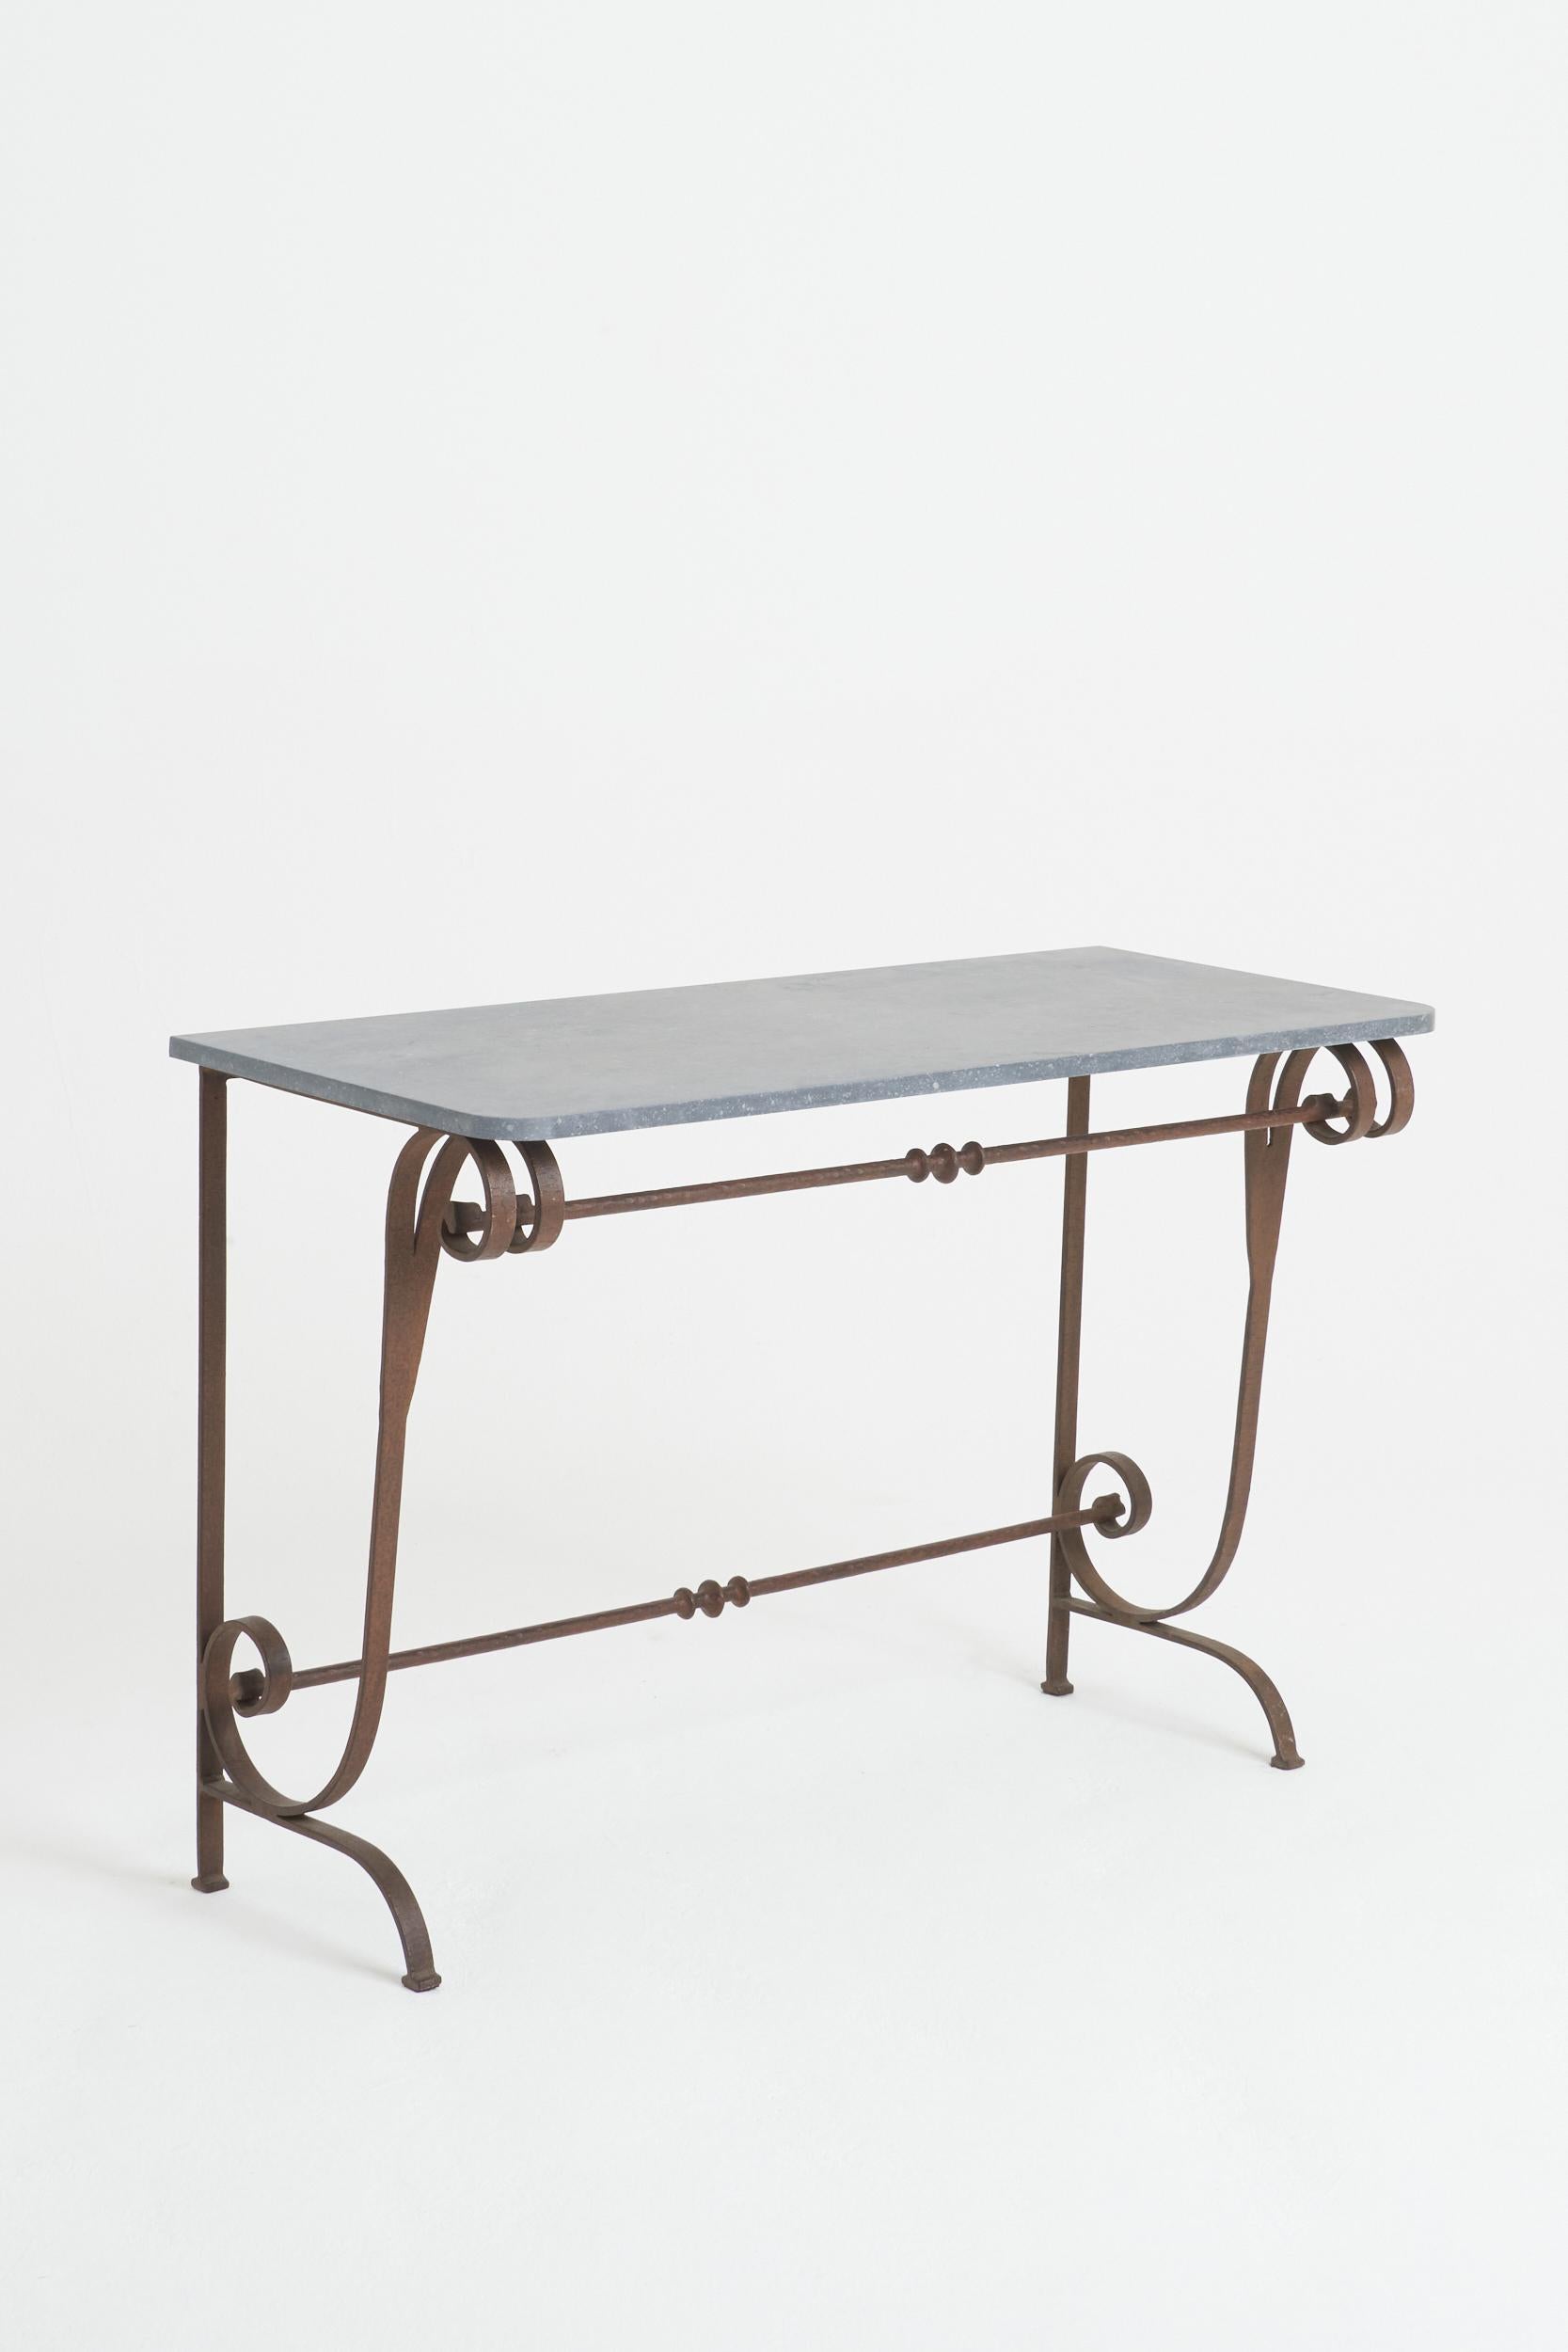 A stone top wrought iron console table.
France, mid-20th century
74.5 cm high by 110 cm wide by 48 cm depth.